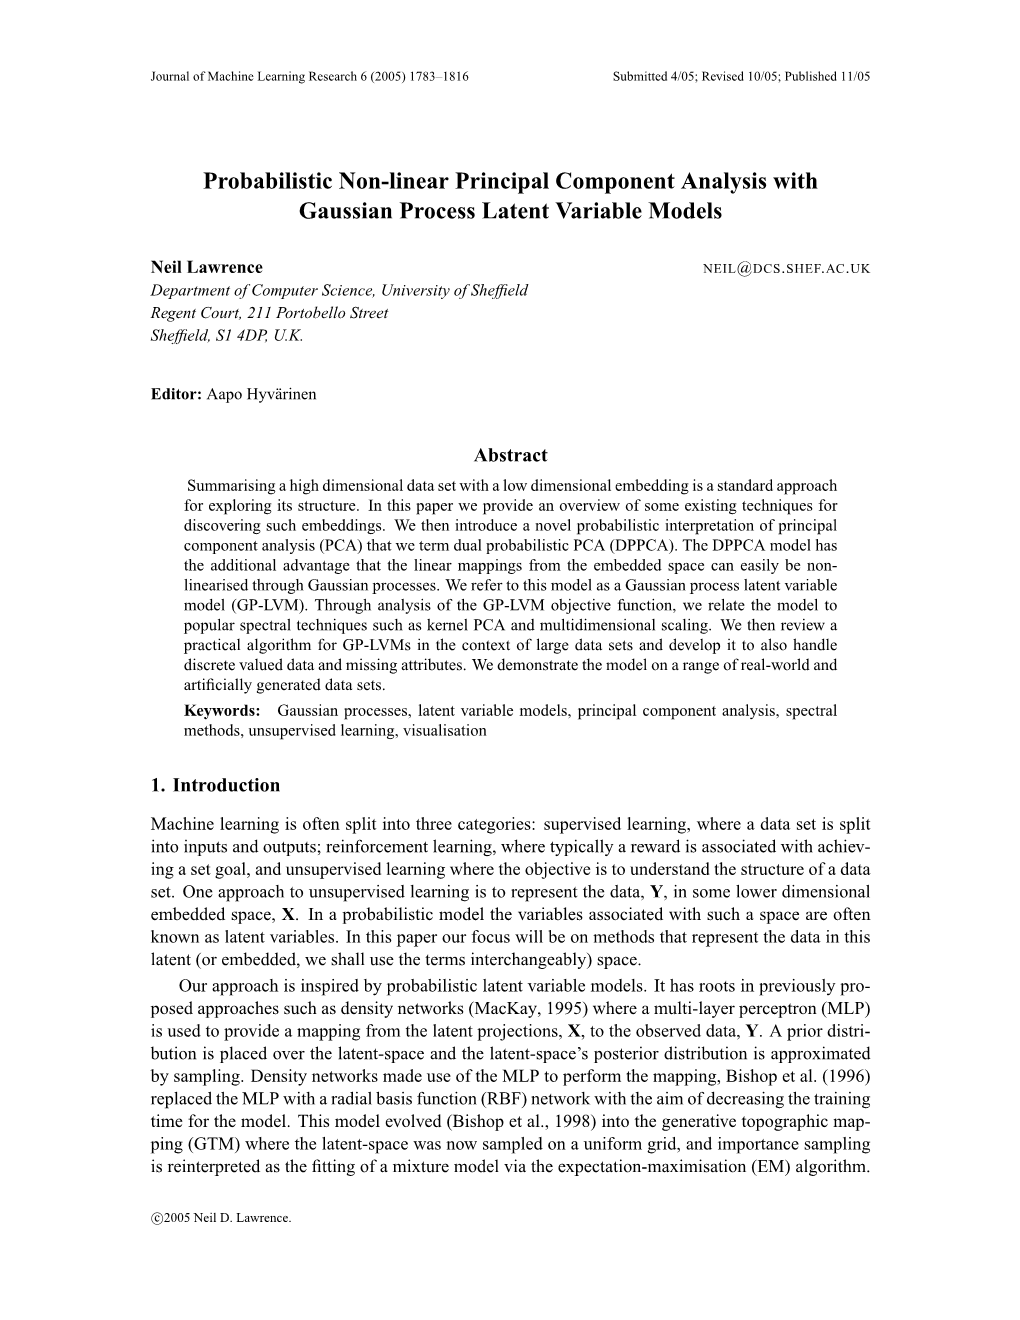 Probabilistic Non-Linear Principal Component Analysis with Gaussian Process Latent Variable Models